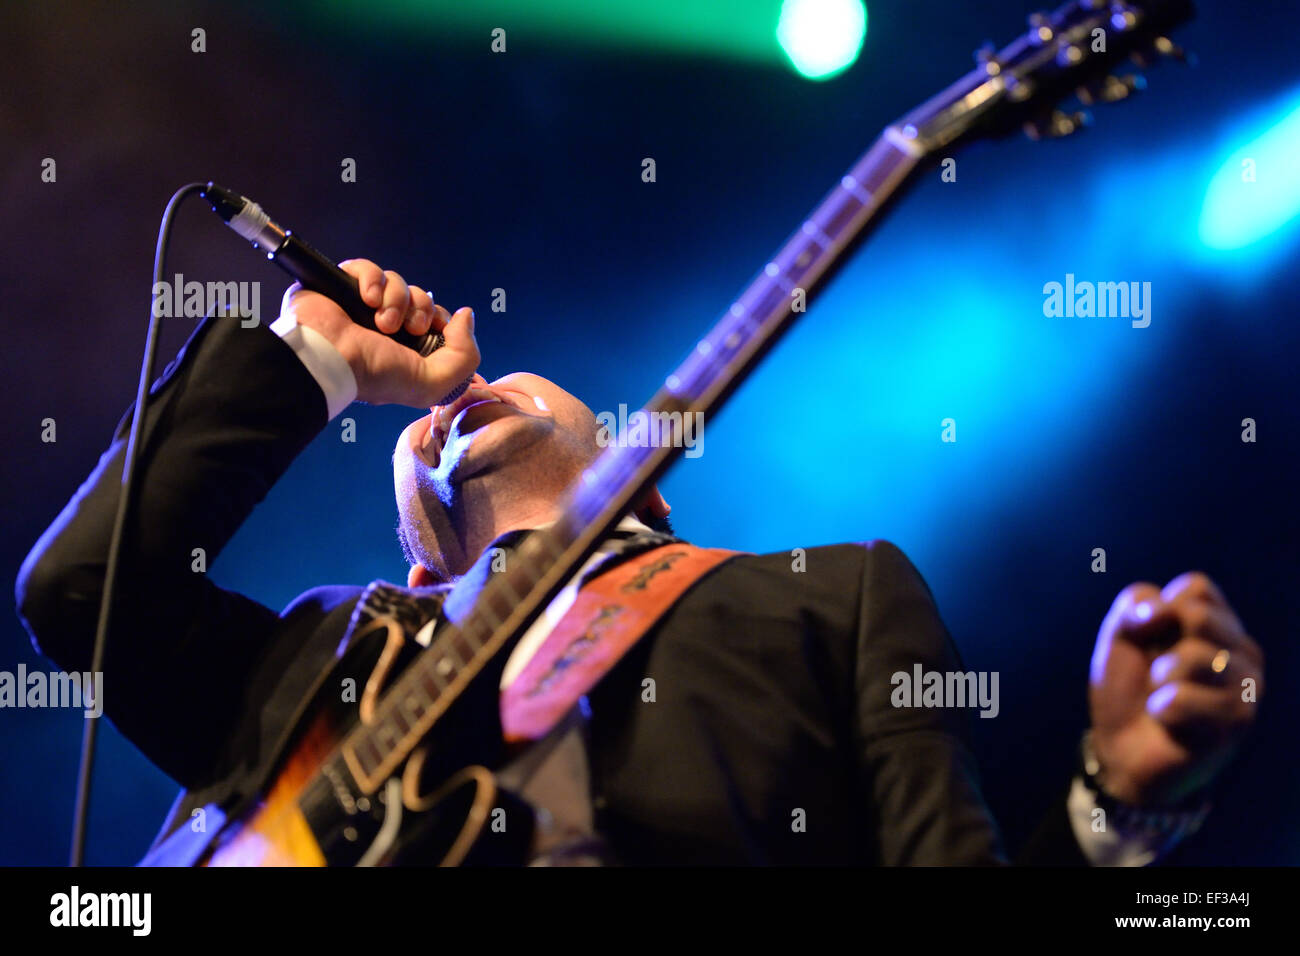 BARCELONA - MAY 15: Eli Paperboy Reed, American singer and songwriter, performance at Barts stage. Stock Photo